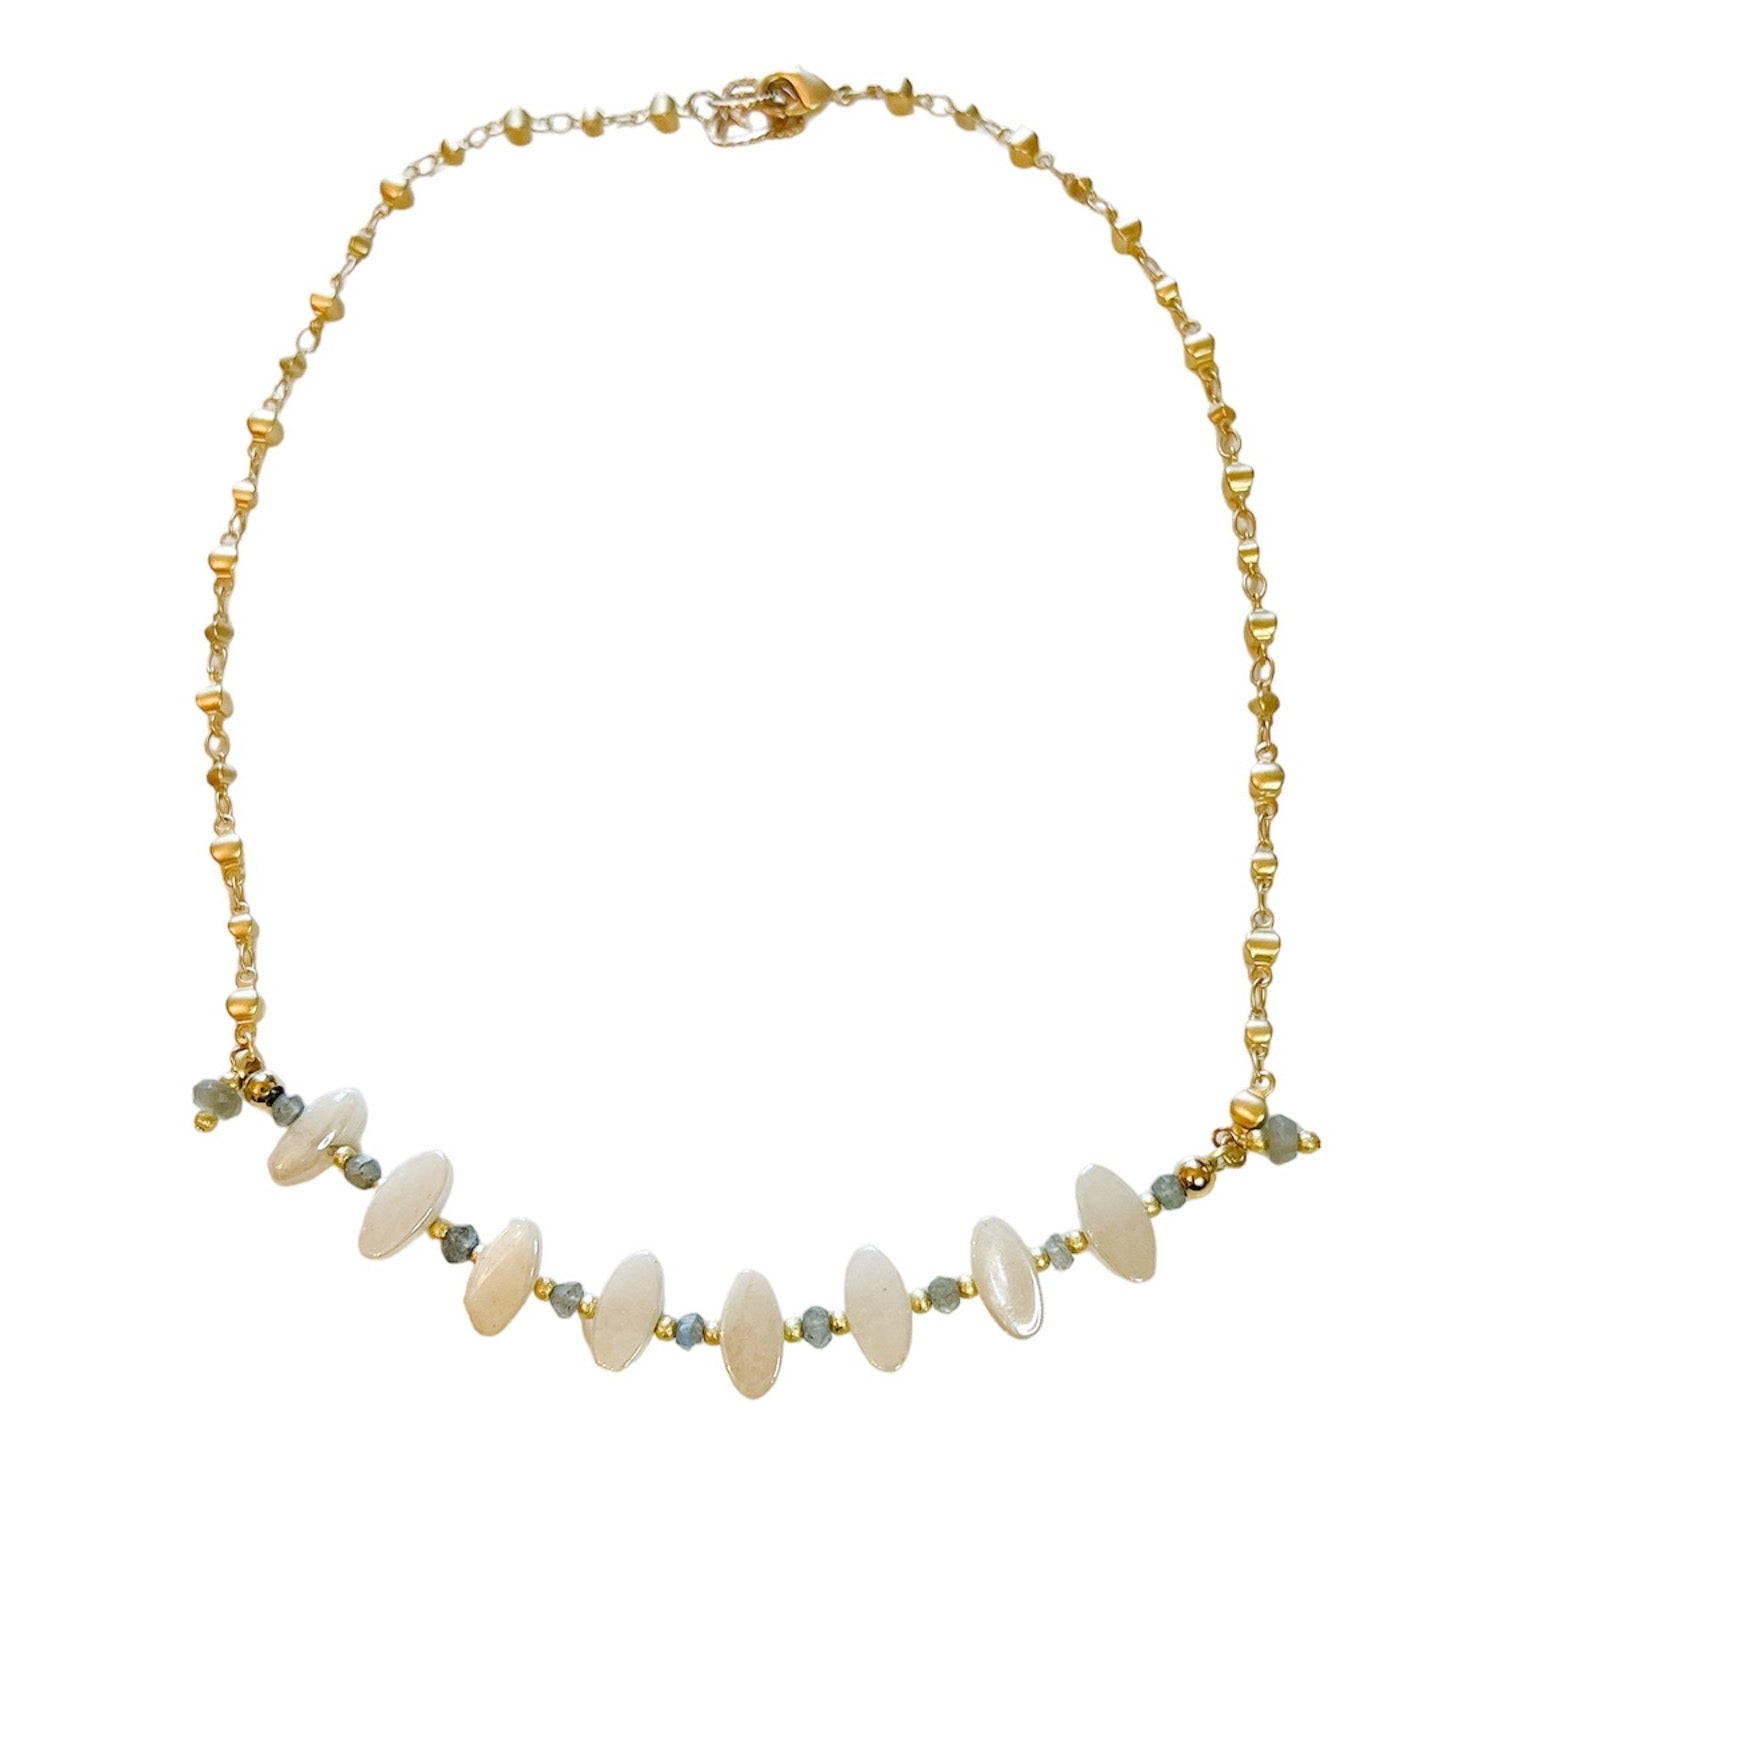 16" textured gold chain. Its unique design consists of cloud white oval charms beautifully complemented with a sparkling aqua stone situated between the ovals.